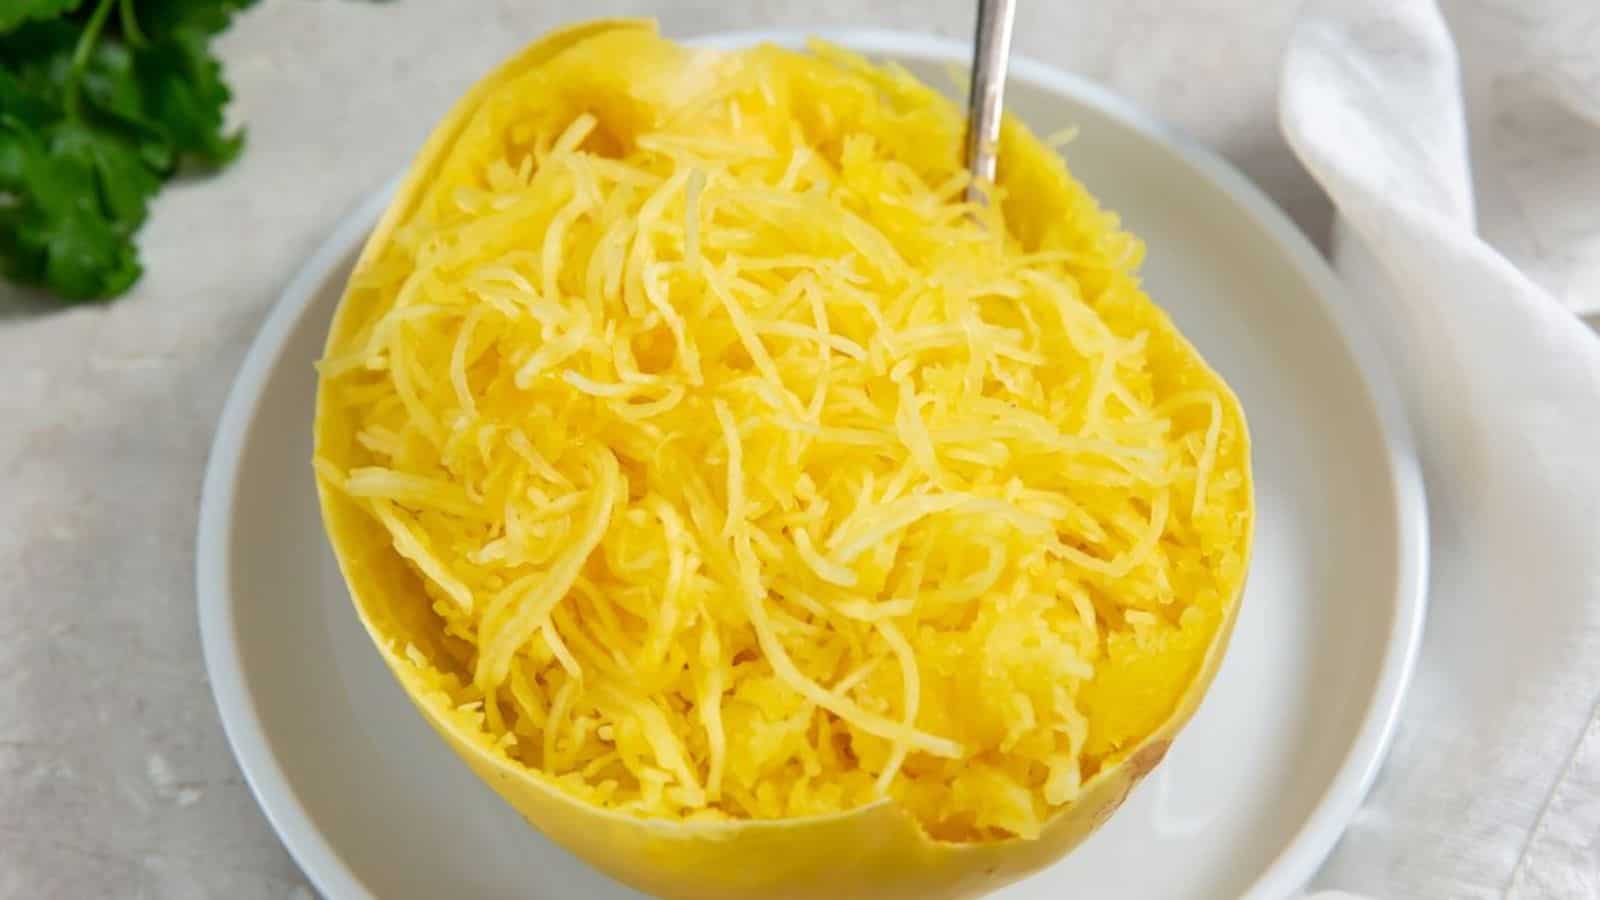 Instant Pot Whole Spaghetti Squash with parsley, salt, and pepper on a white plate and a fork.